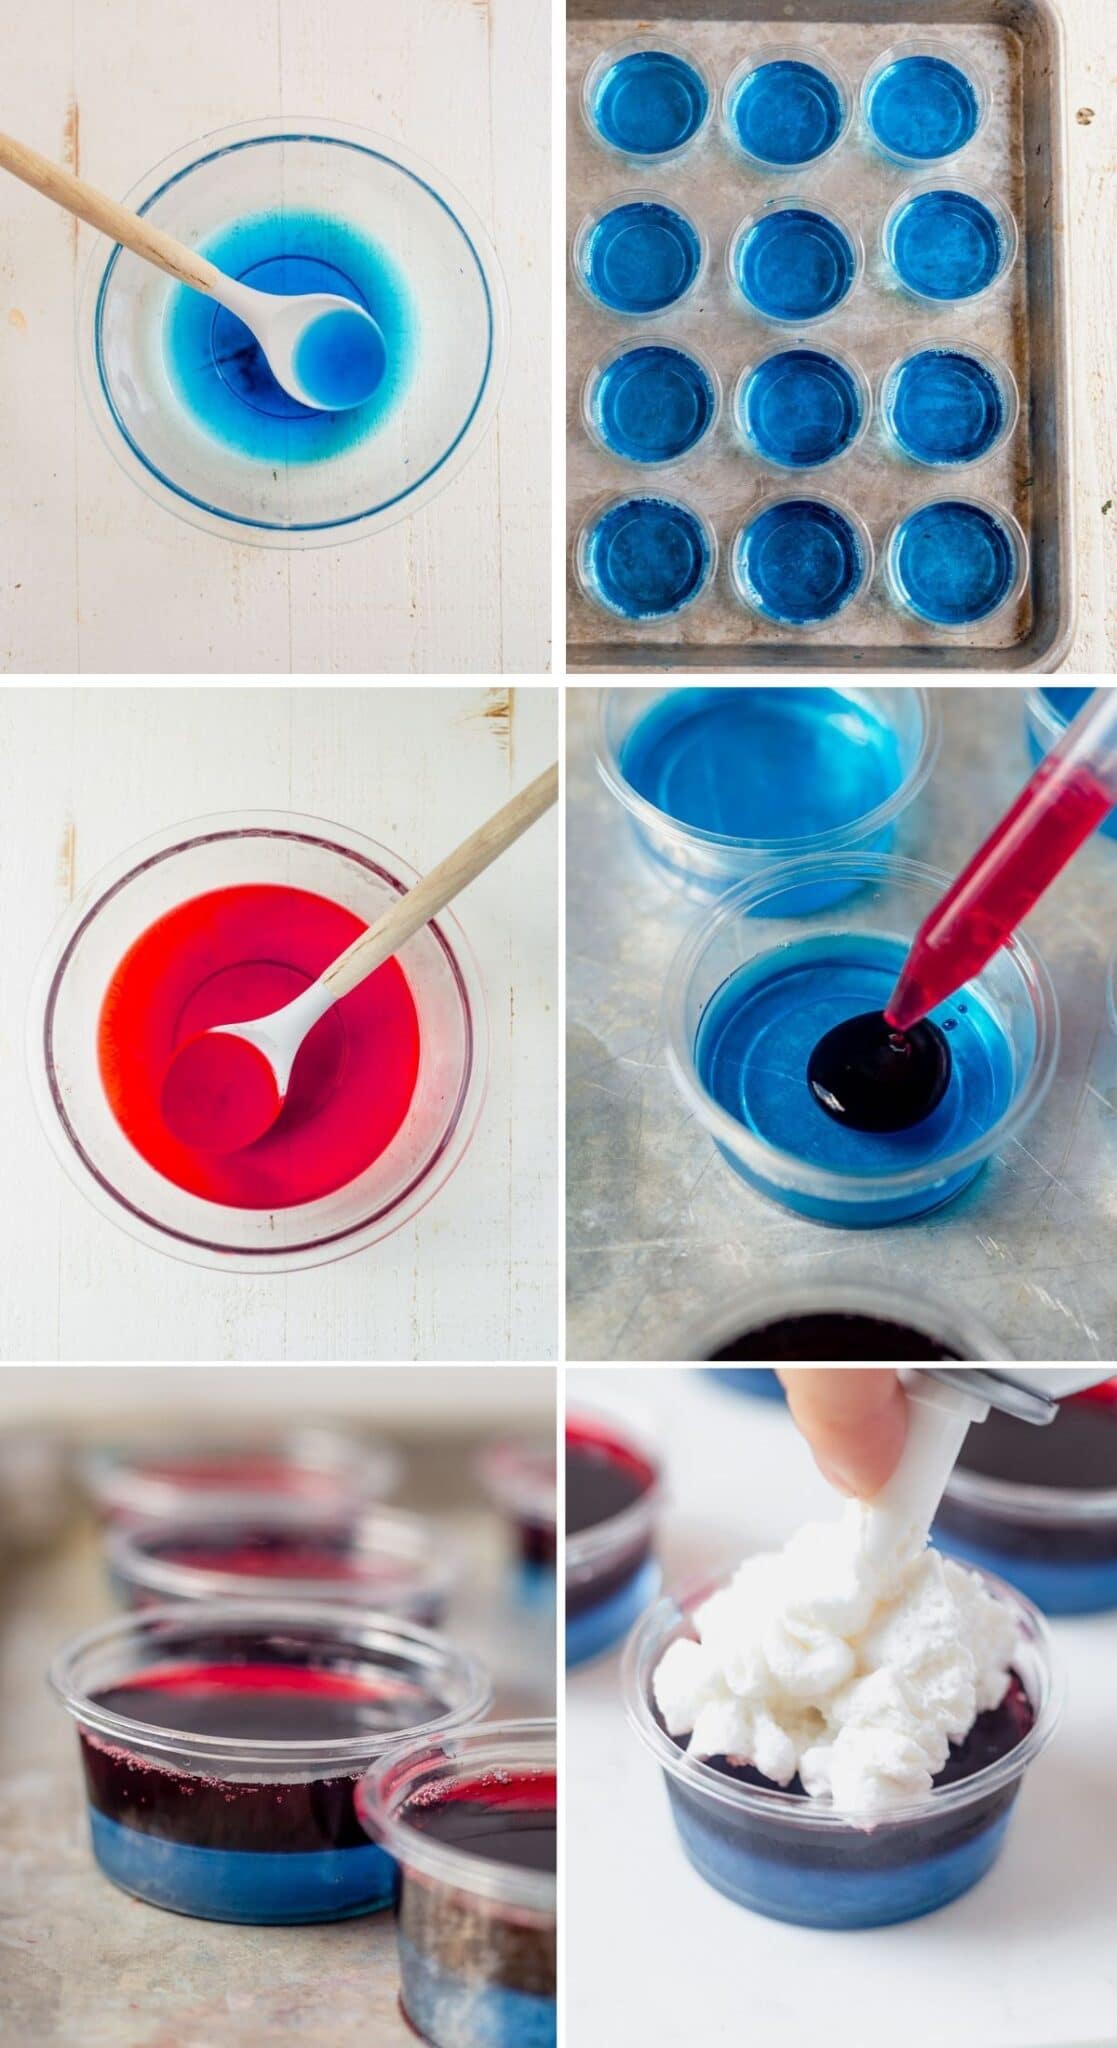 step by step images showing you how to make red white and blue jello shots by making the jello then layering them in 2oz cups and topping them with whipped cream